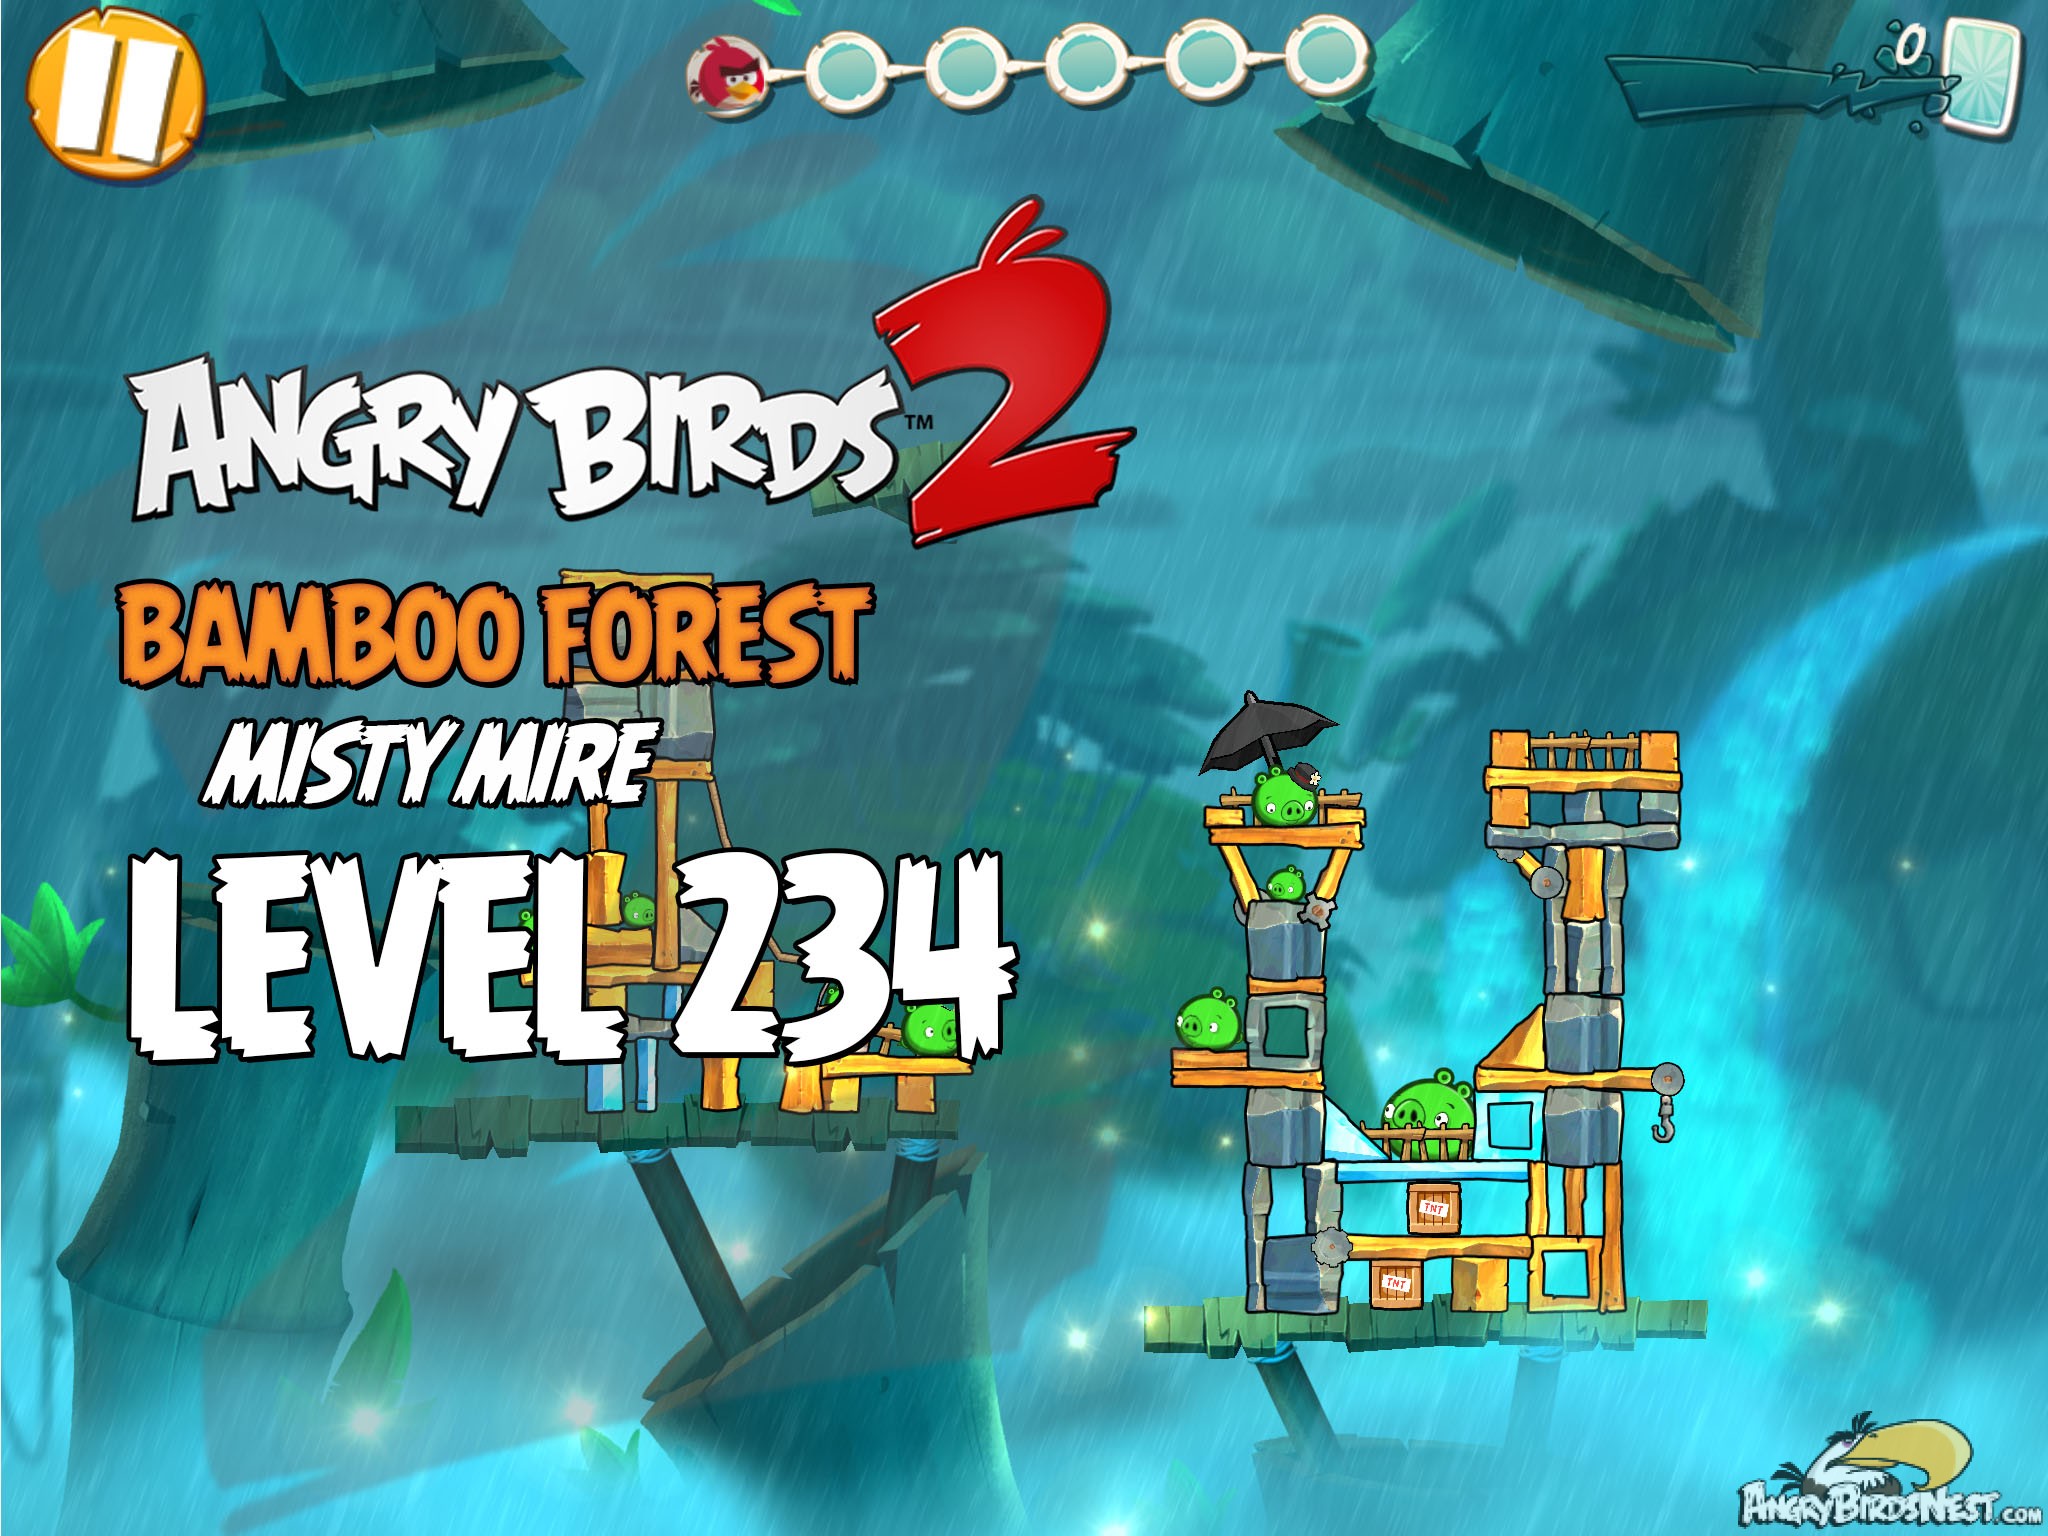 Angry Birds 2 Bamboo Forest Misty Mire Level 234